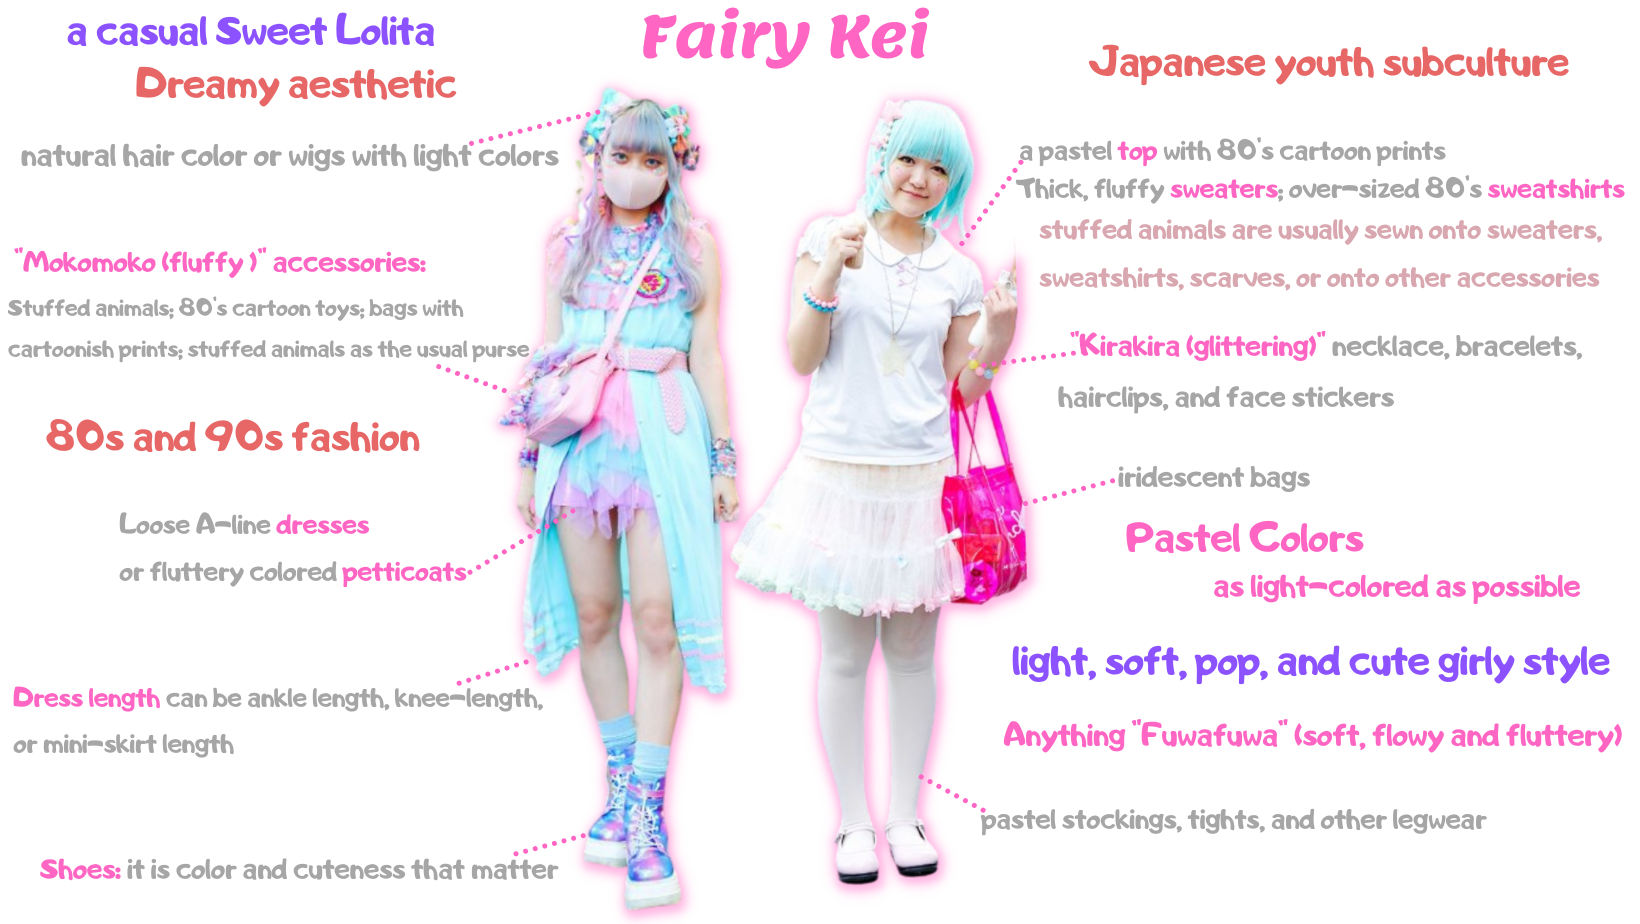 6. "Fairy Kei Blue Hair Inspiration: Instagram Accounts to Follow" - wide 6